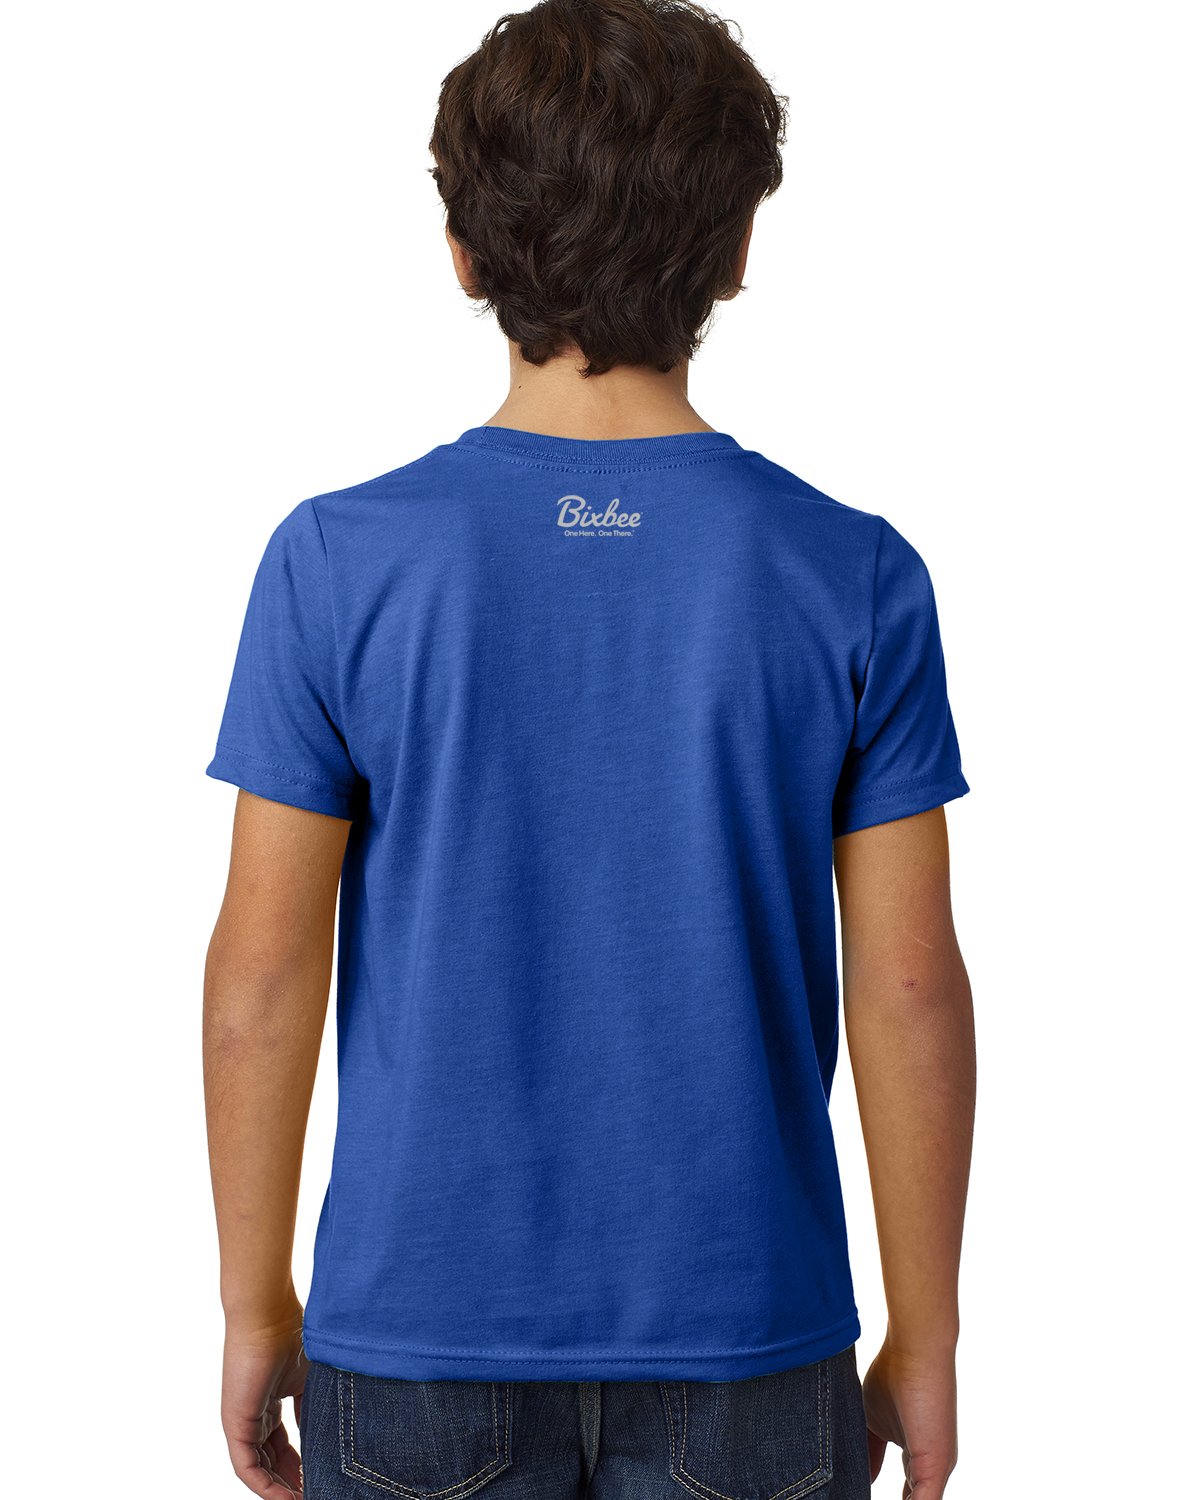 Inside-Out T-Shirt - Ready-to-Wear 1A5W6A